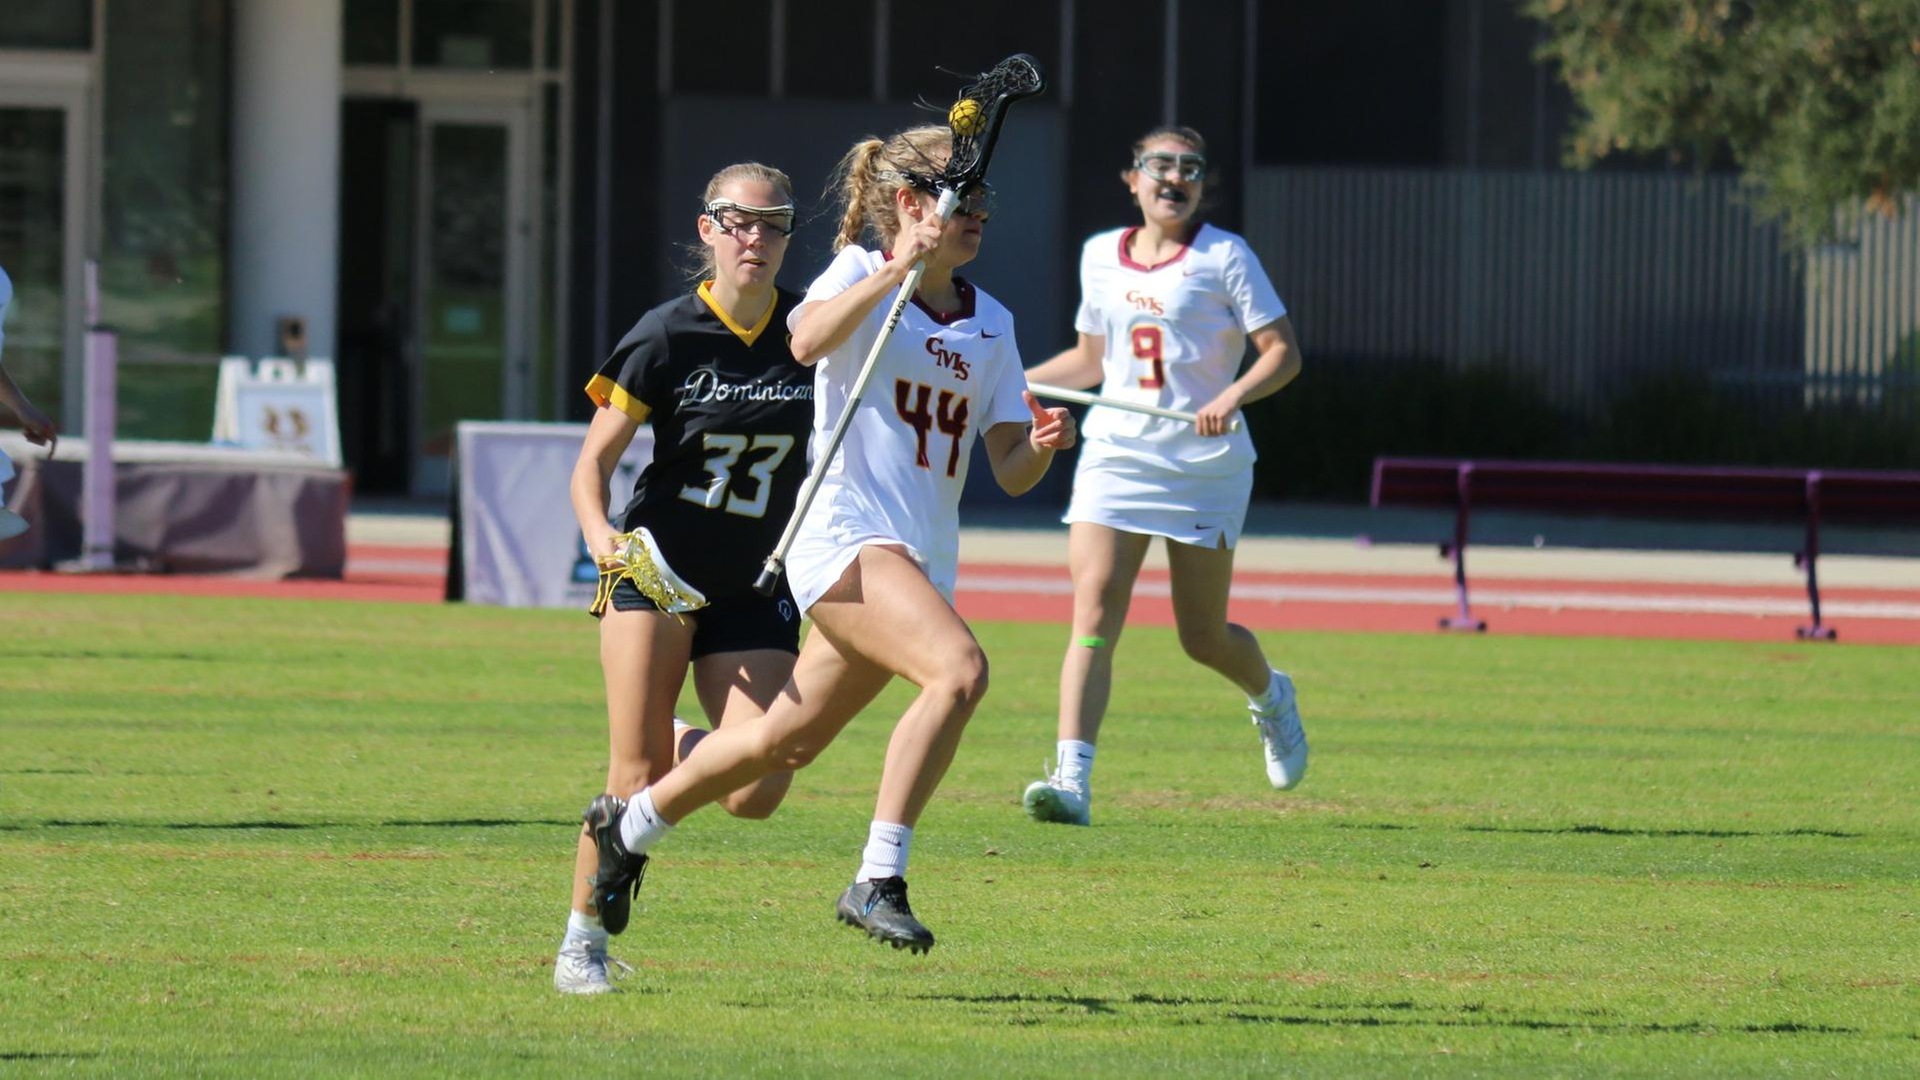 Stella Hansot had five goals to lead CMS (photo by Ruby Marks)